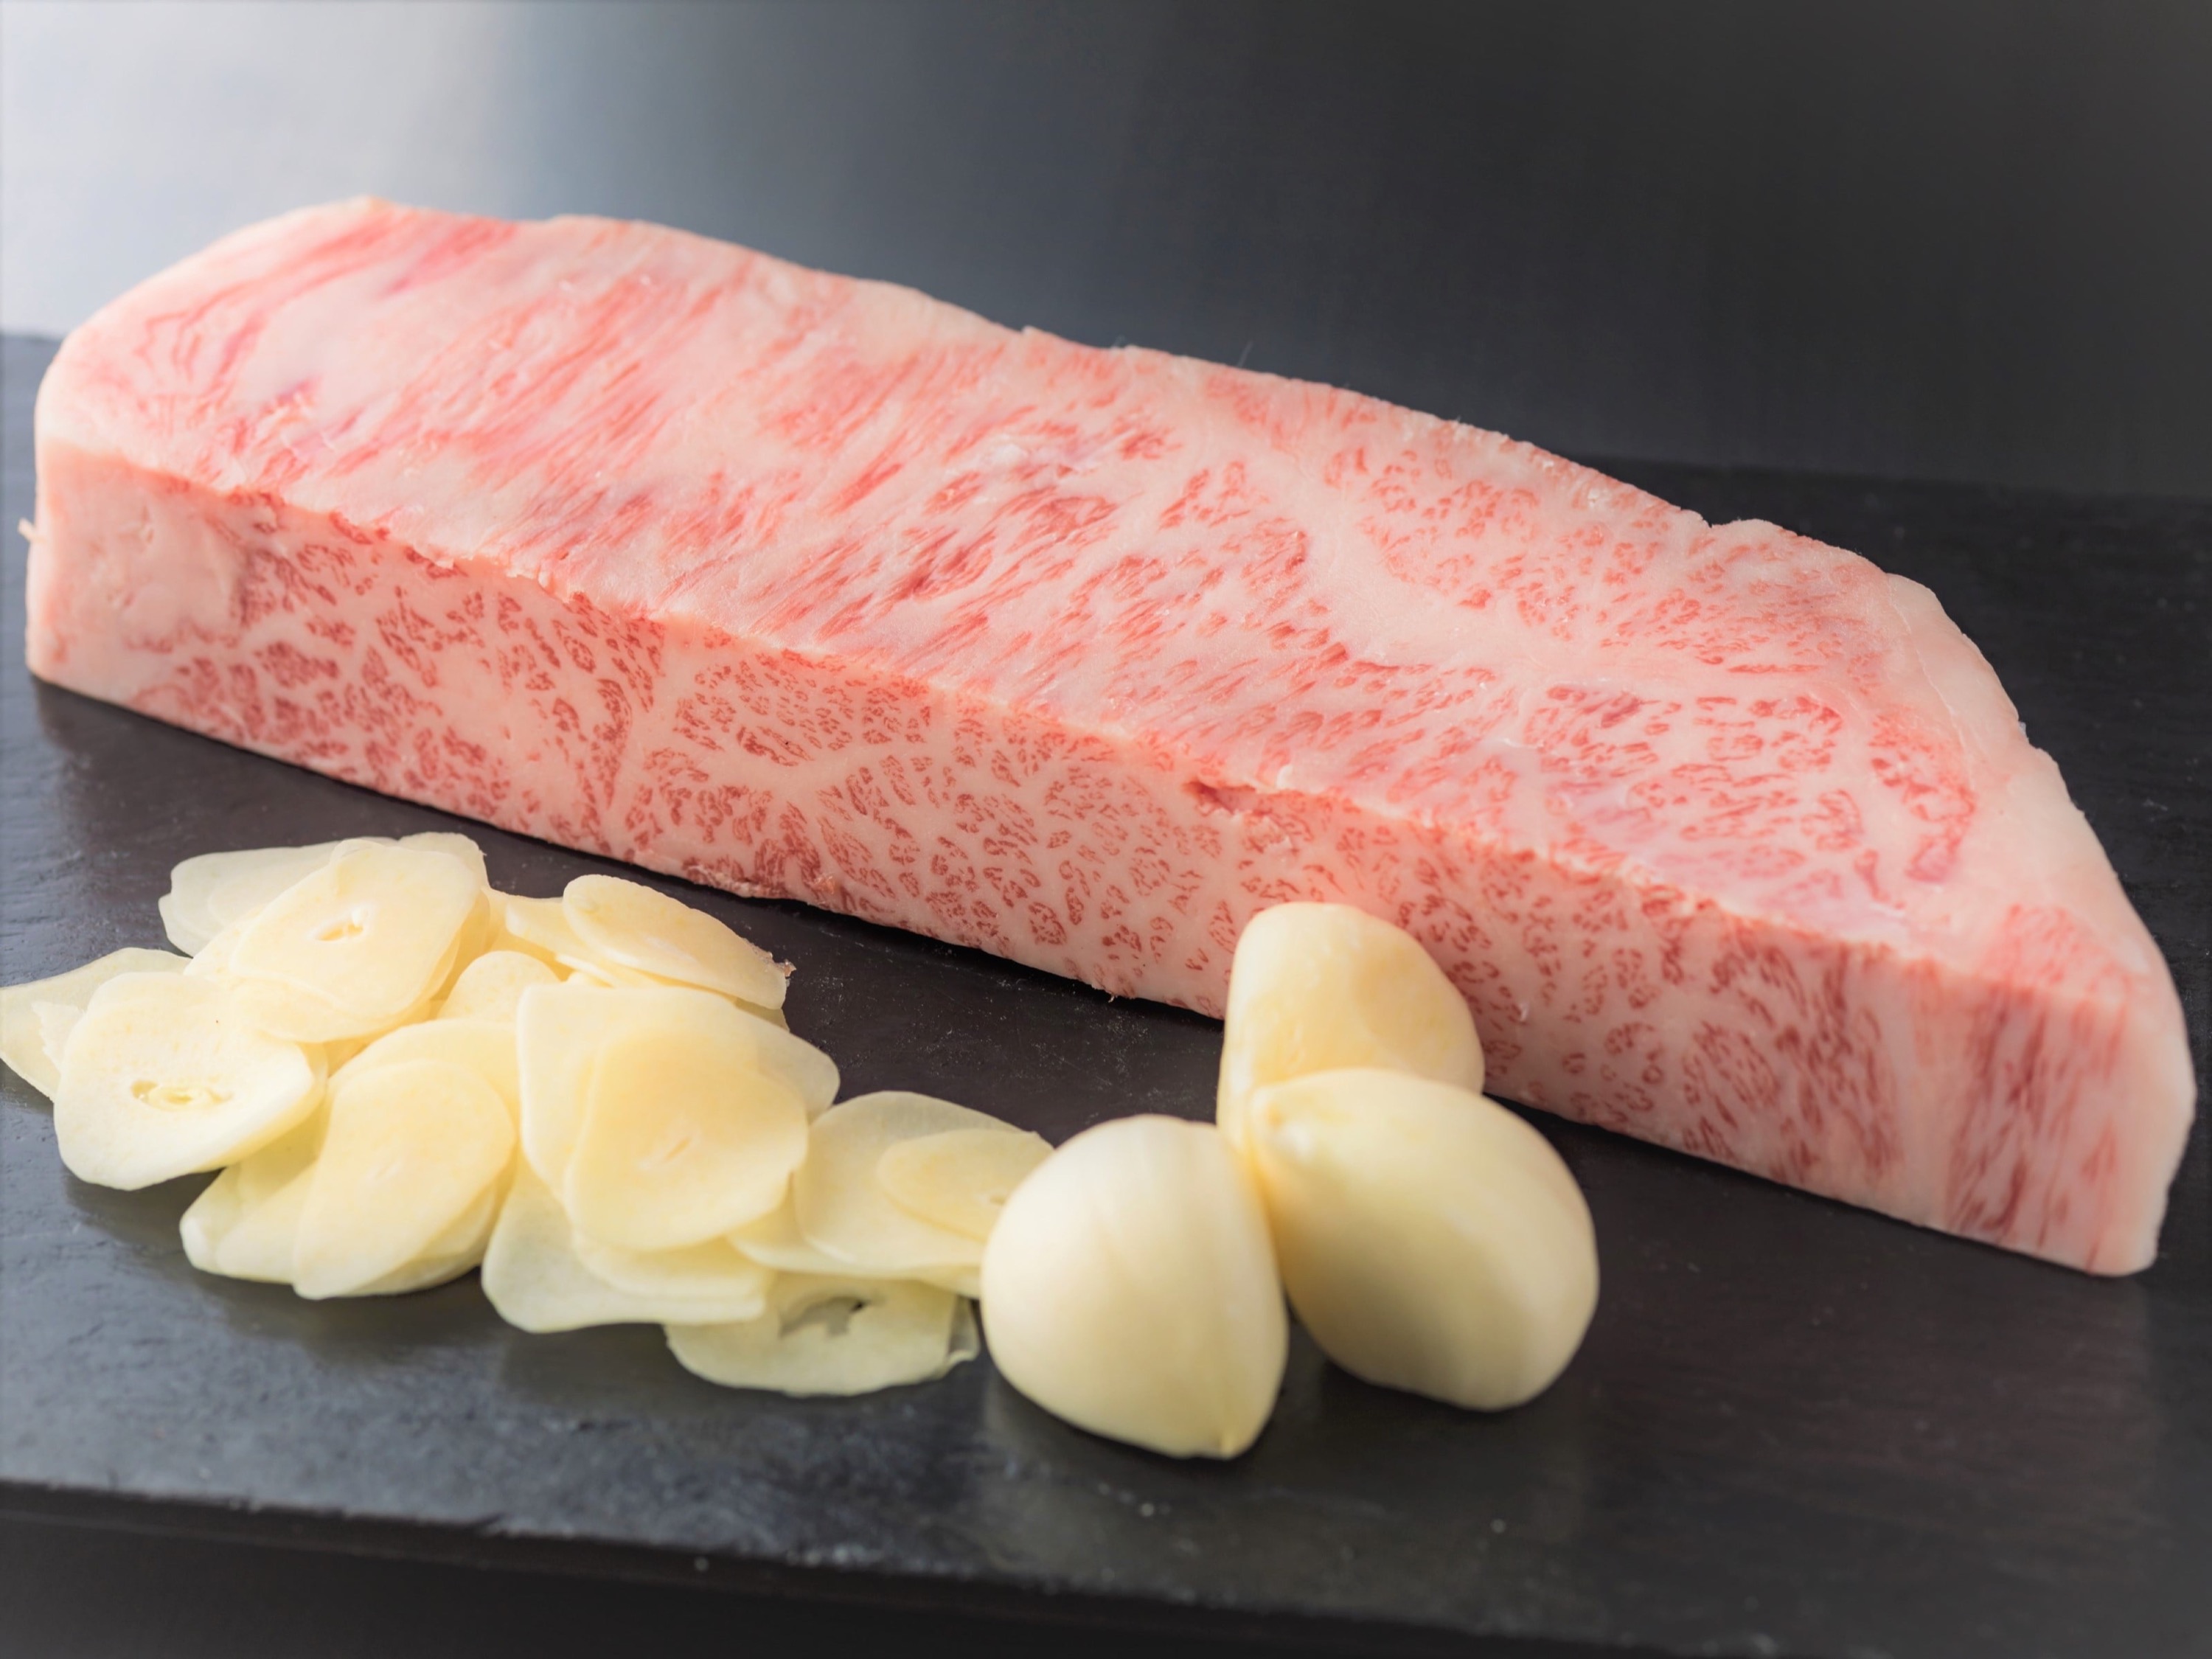 You can now enjoy the taste of the original Misono’s teppanyaki Kobe beef steak in the sky lounge on the 51st floor of the Sumitomo building, in Shinjuku, Tokyo.